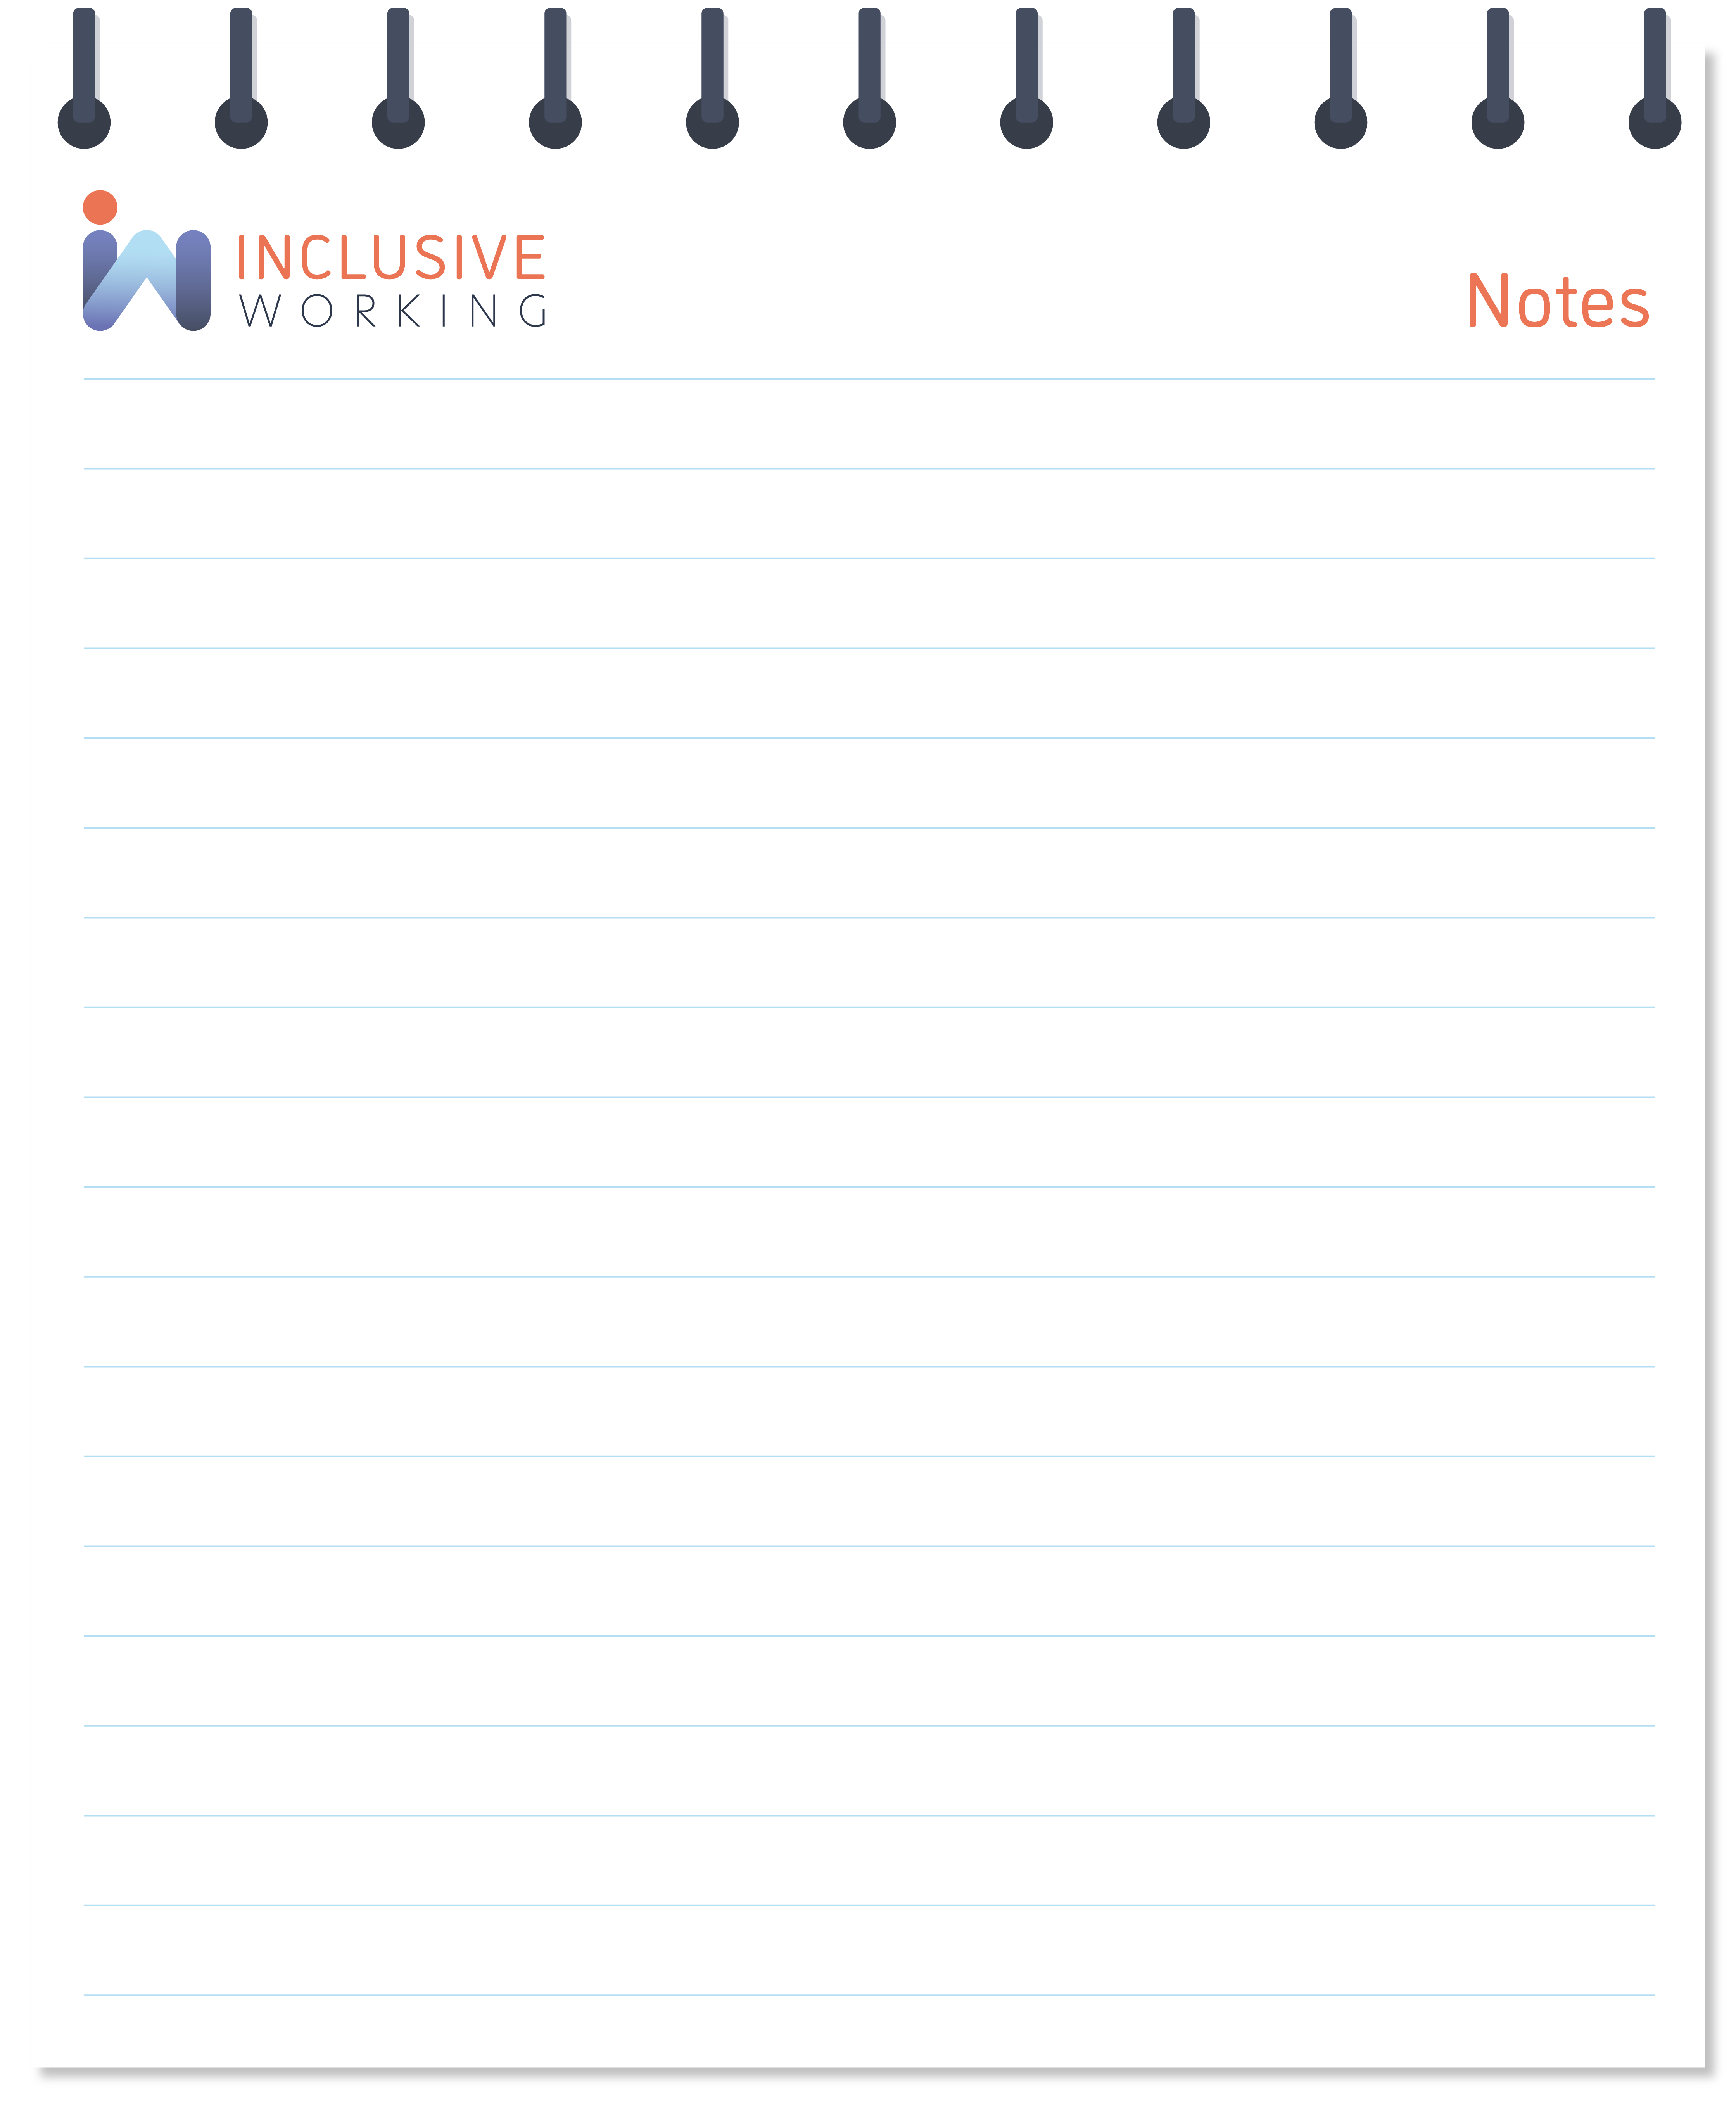 This is an image of an Inclusive Working Notepad